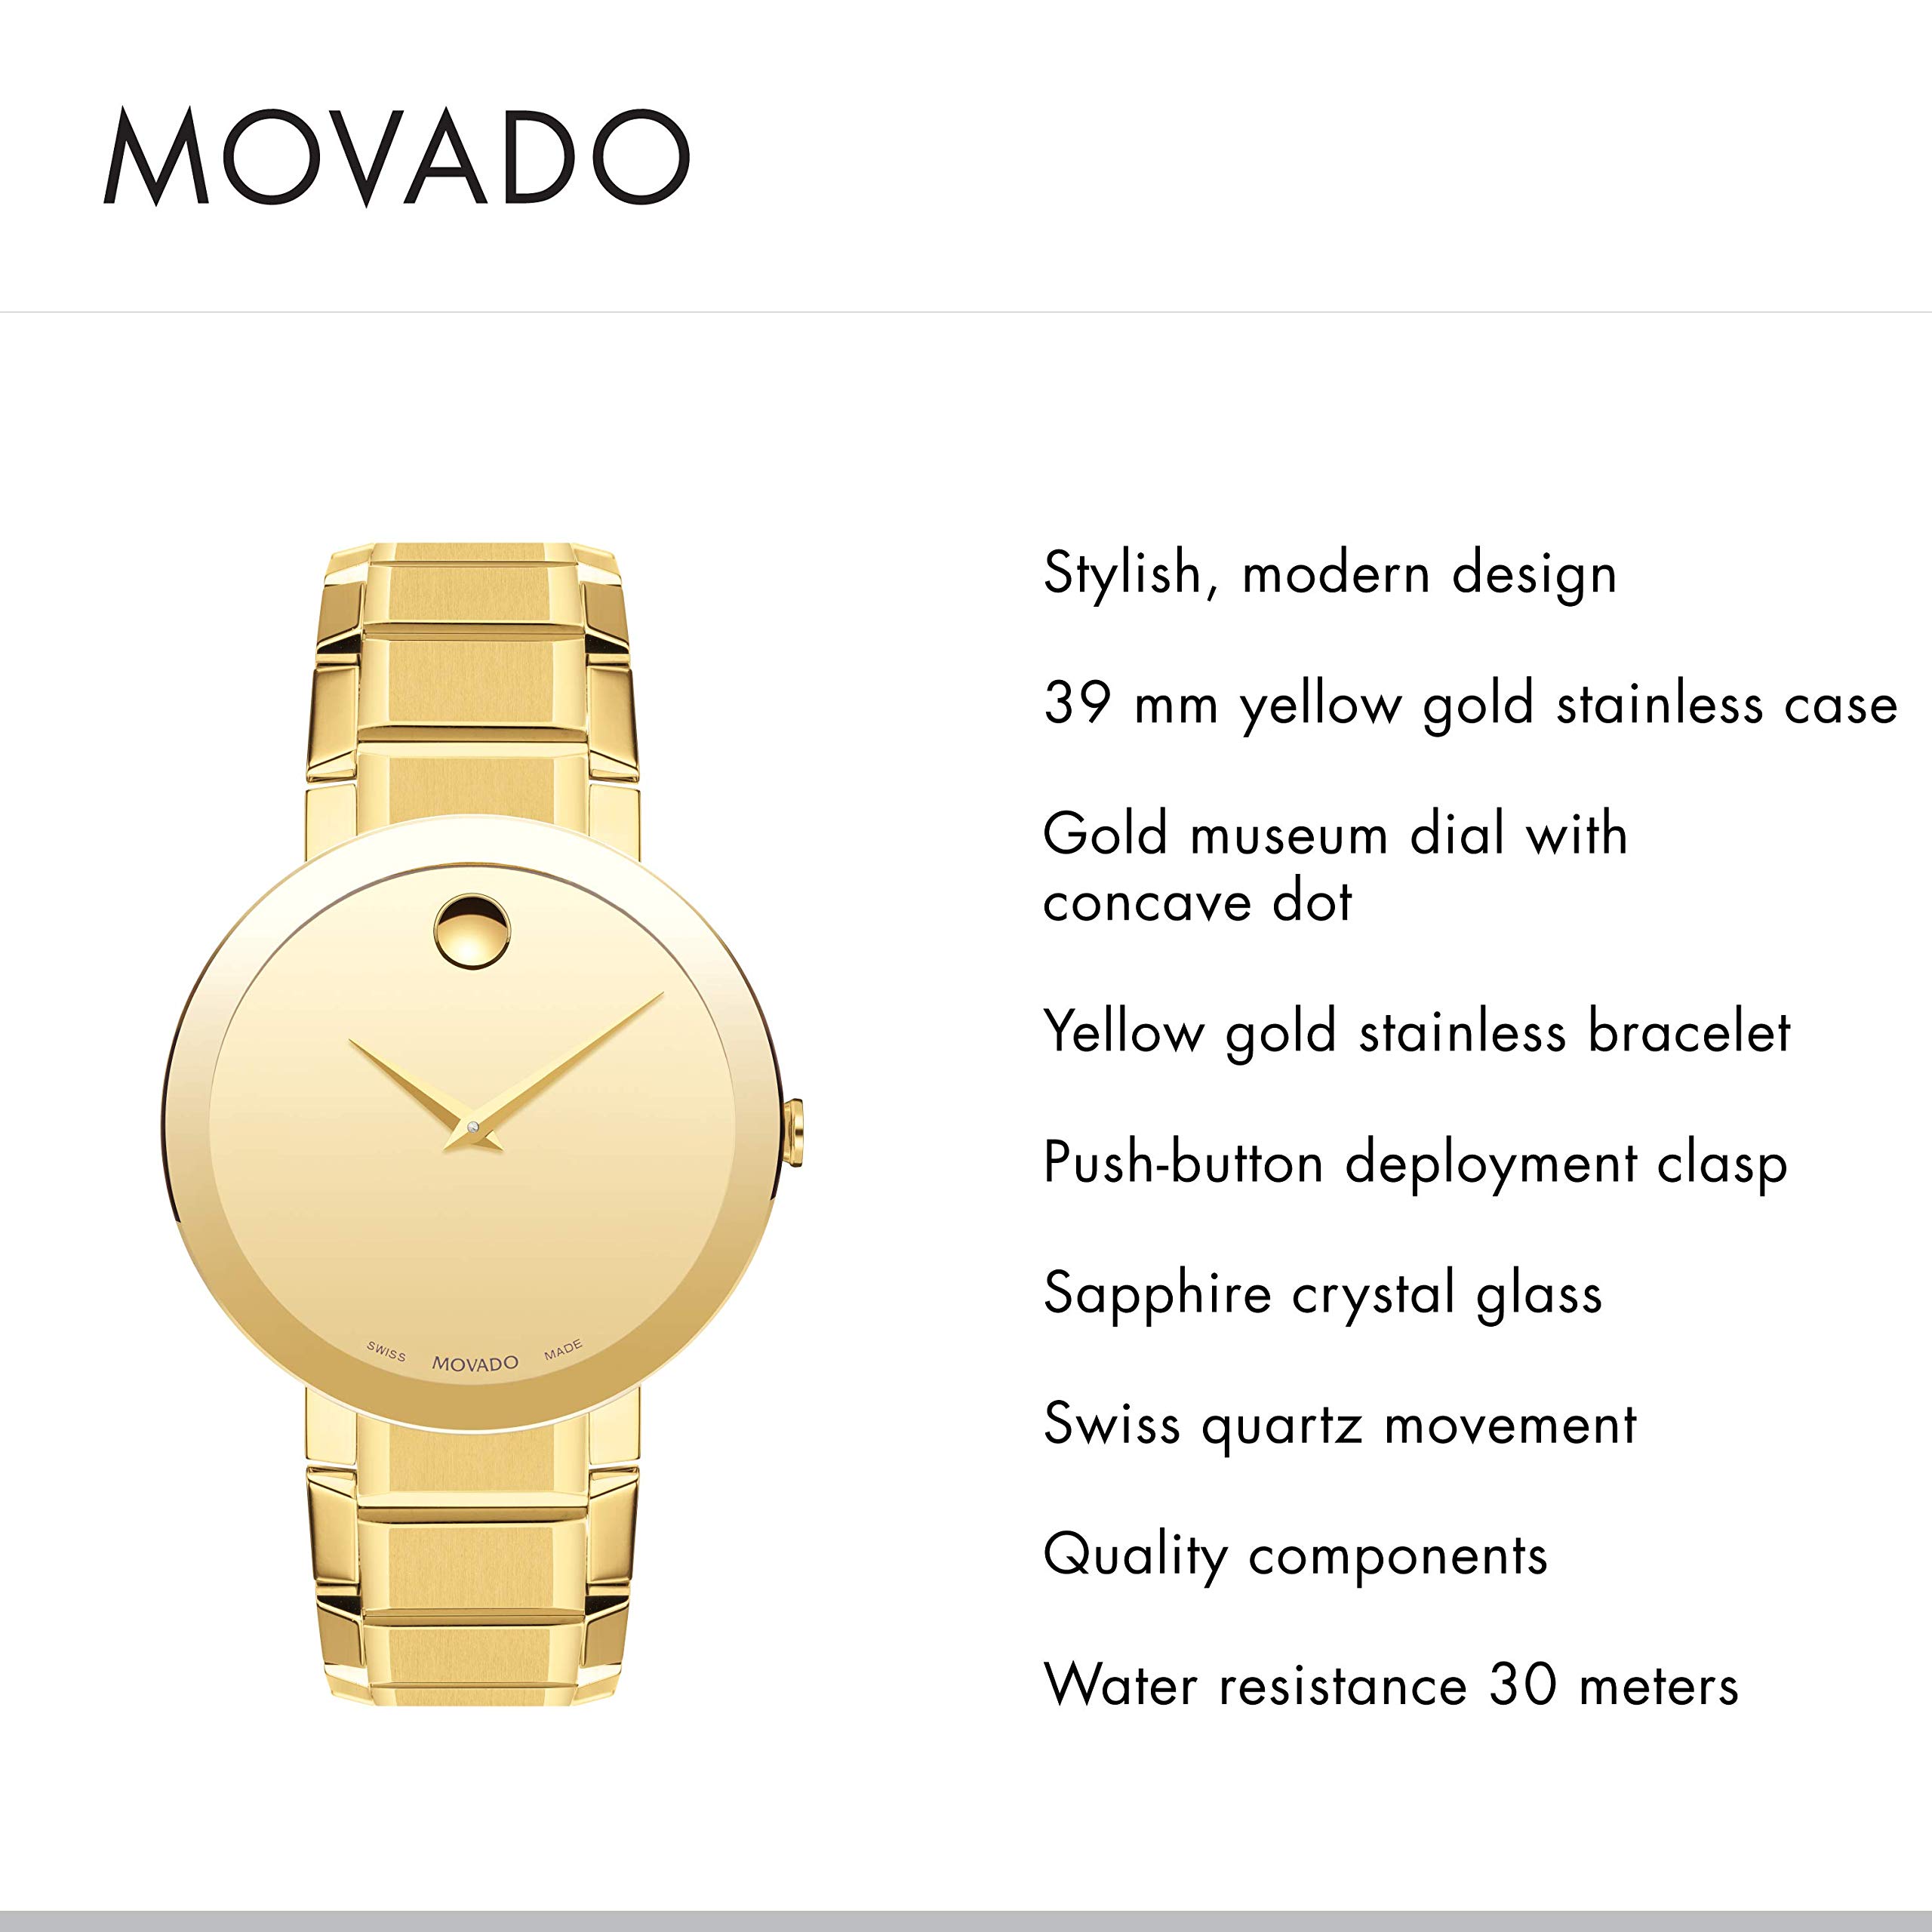 Movado Men's Sapphire Yellow Gold Watch with a Concave Dot Museum Dial, Gold (Model 607180)